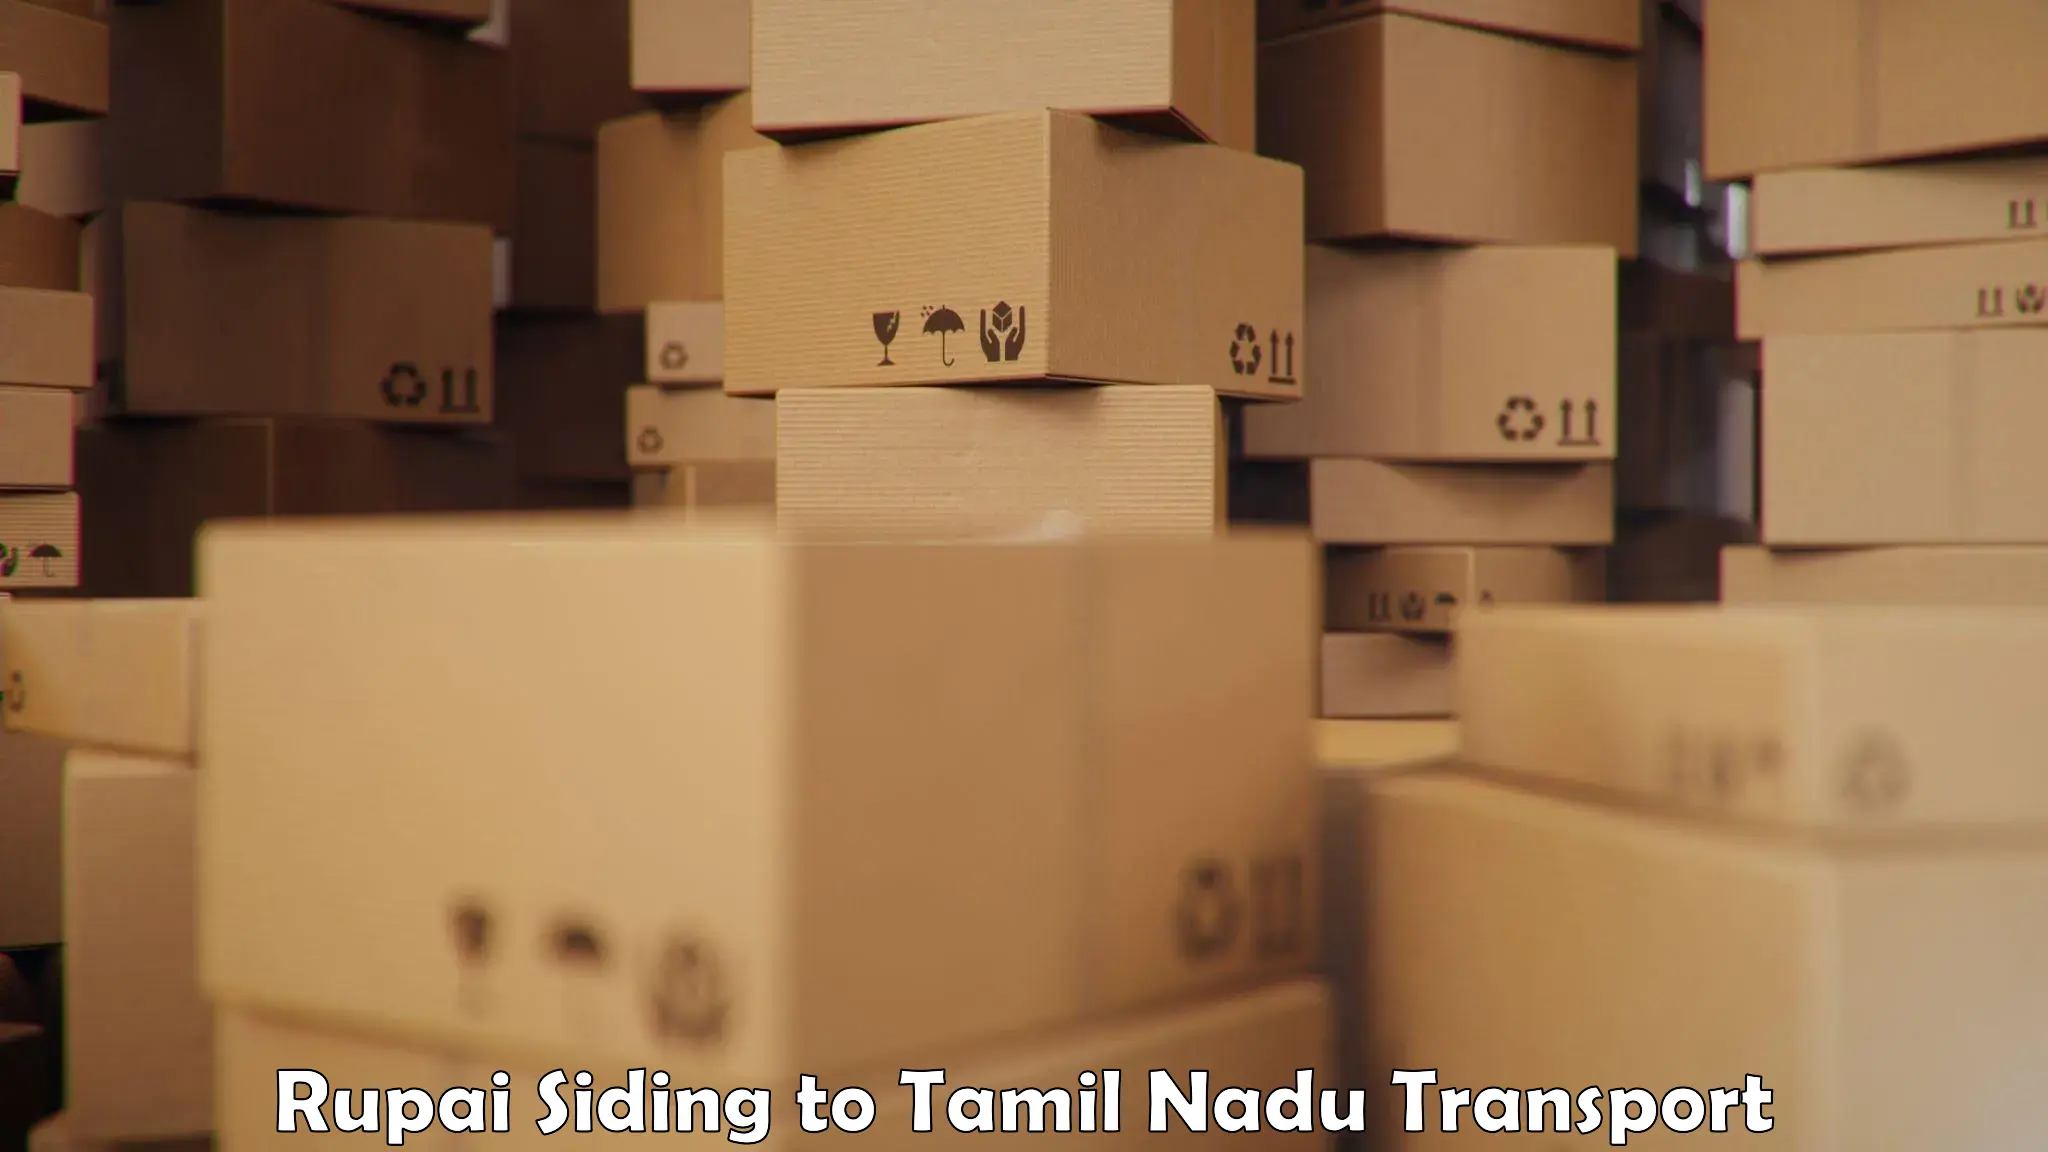 Door to door transport services Rupai Siding to SRM Institute of Science and Technology Chennai